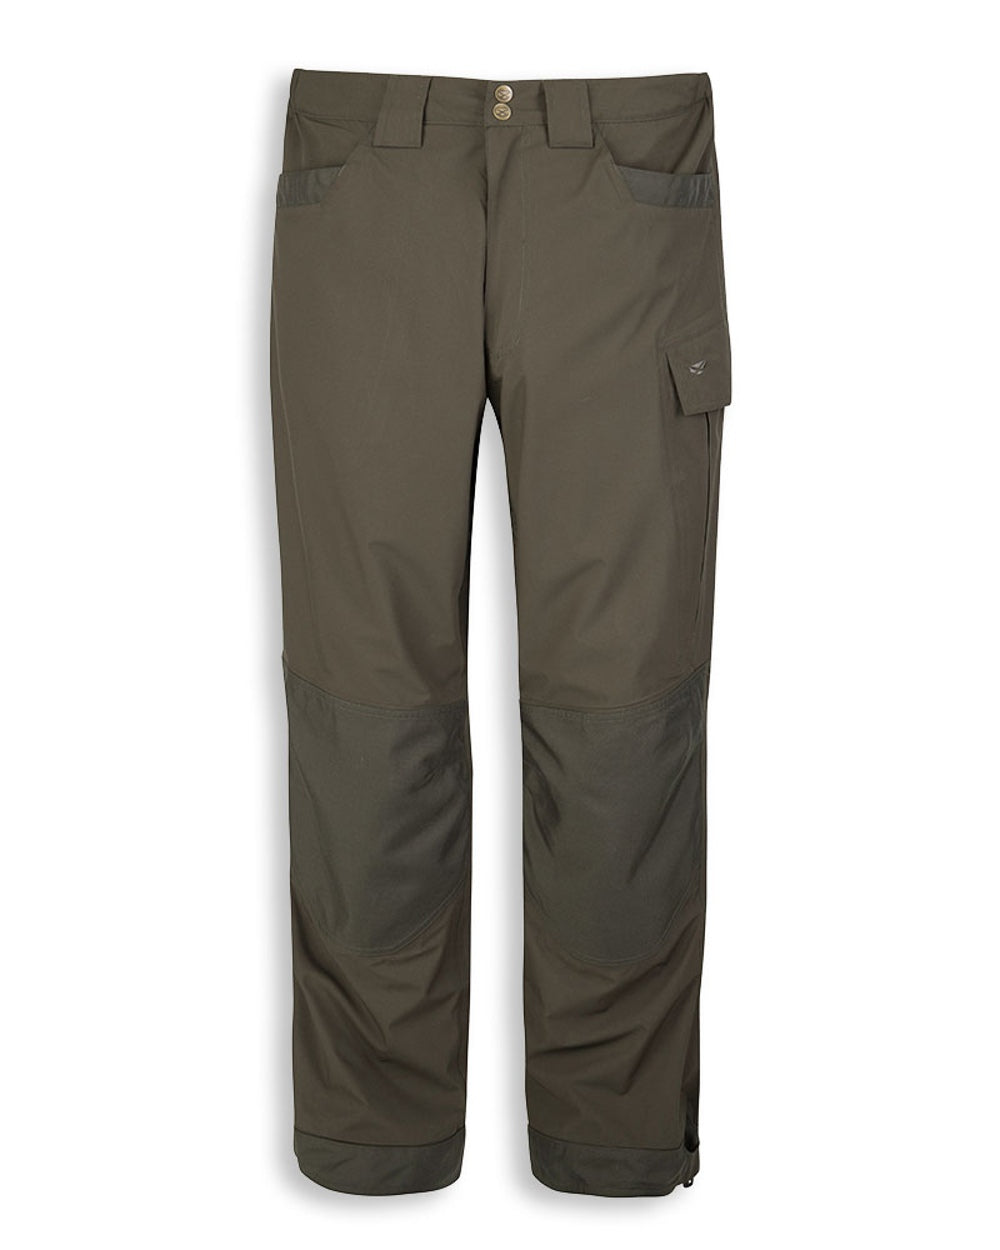 Green coloured Hoggs of Fife Culloden Waterproof Trousers on white background